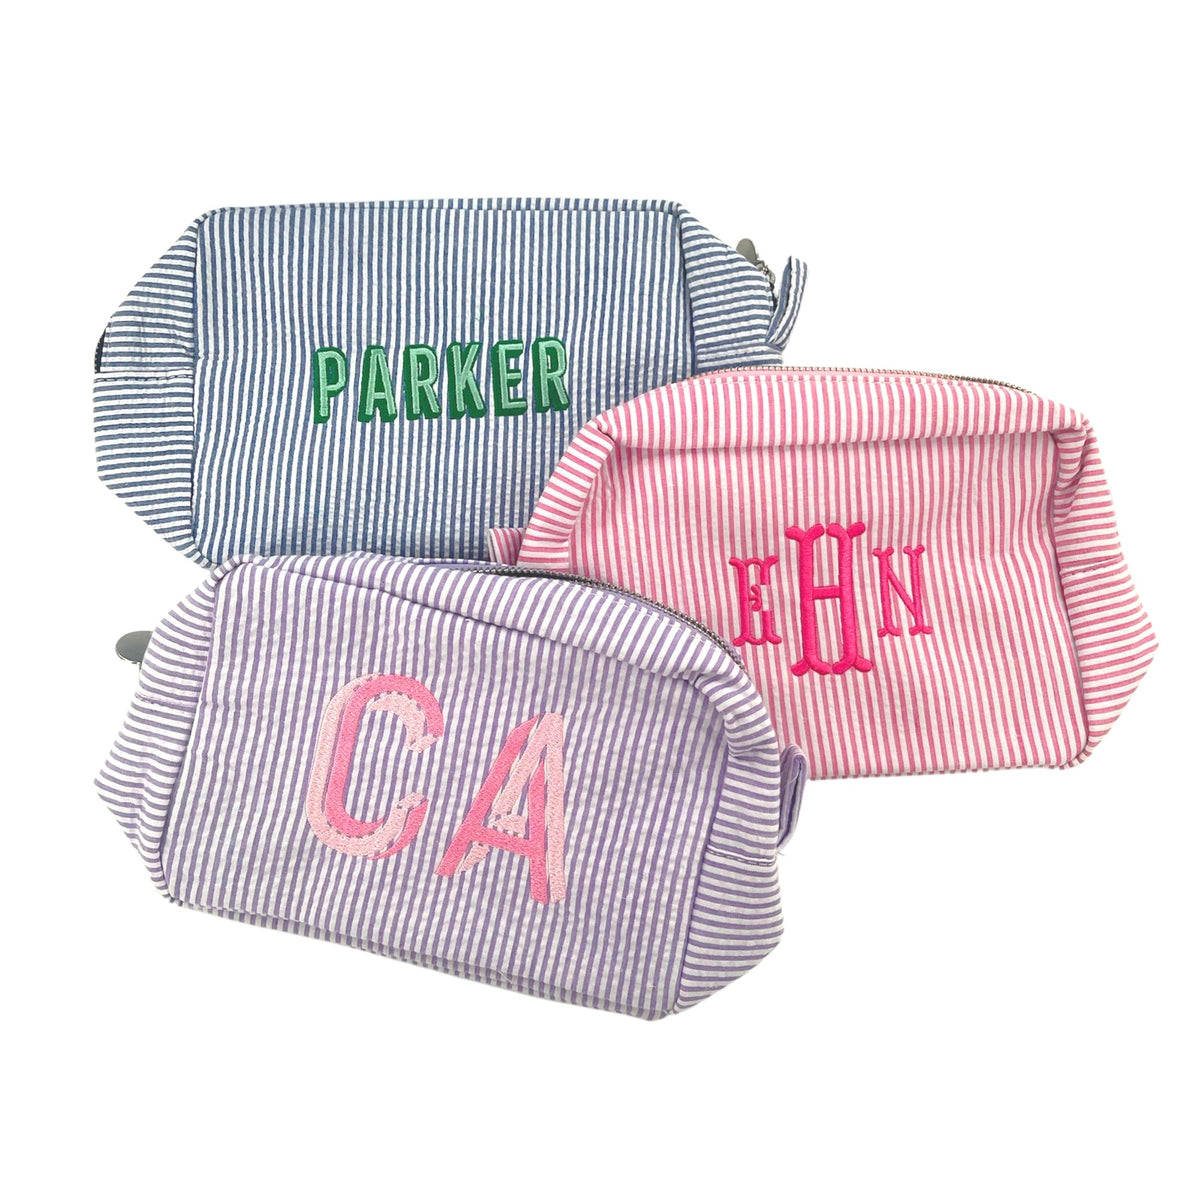 White Monogrammed Travel Jewelry Case - Sprinkled With Pink